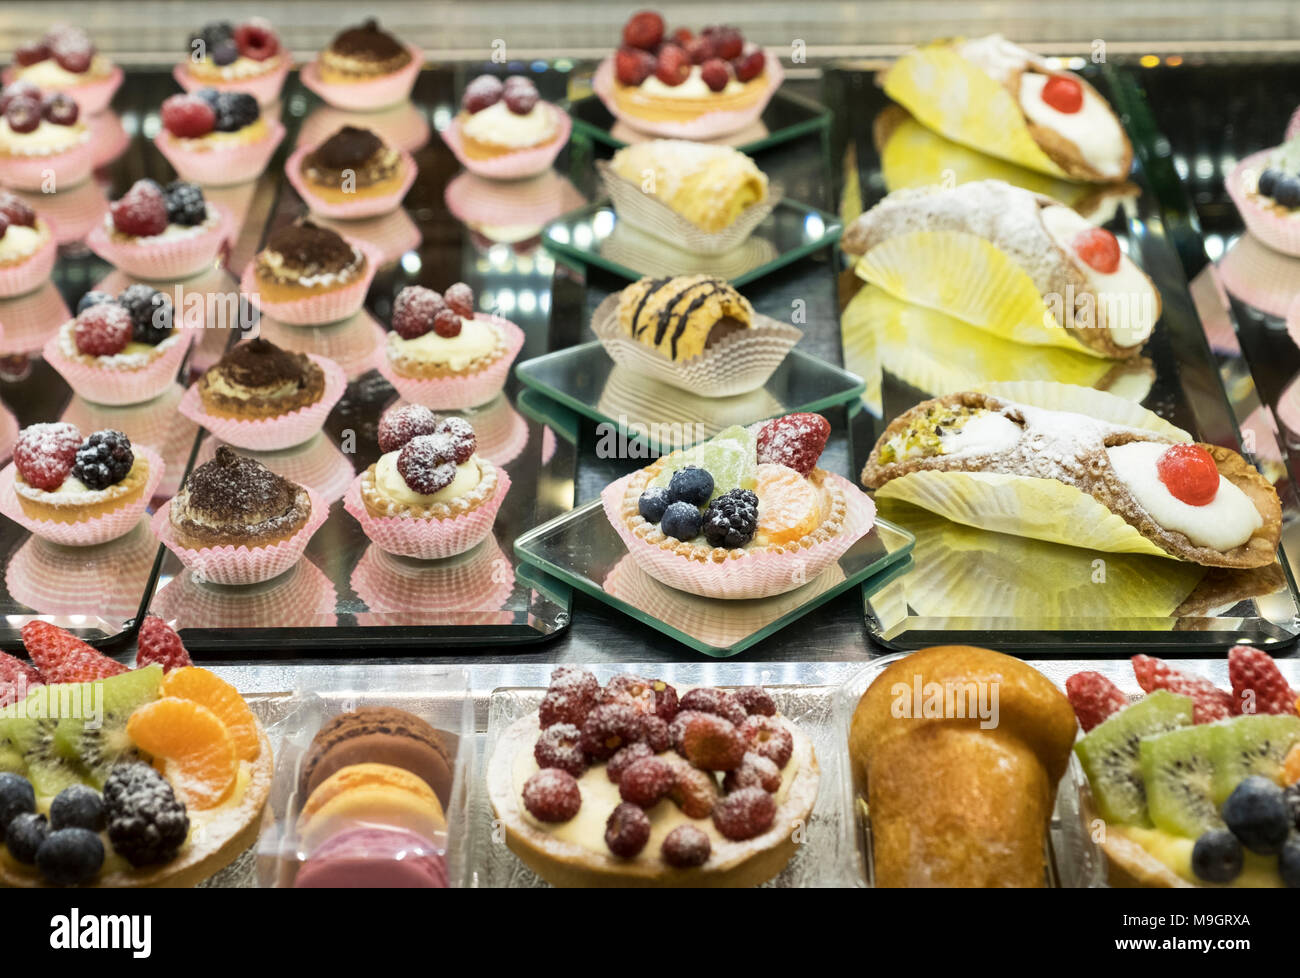 Large Selection Of Pastries And Cakes On Display In Refrigerated